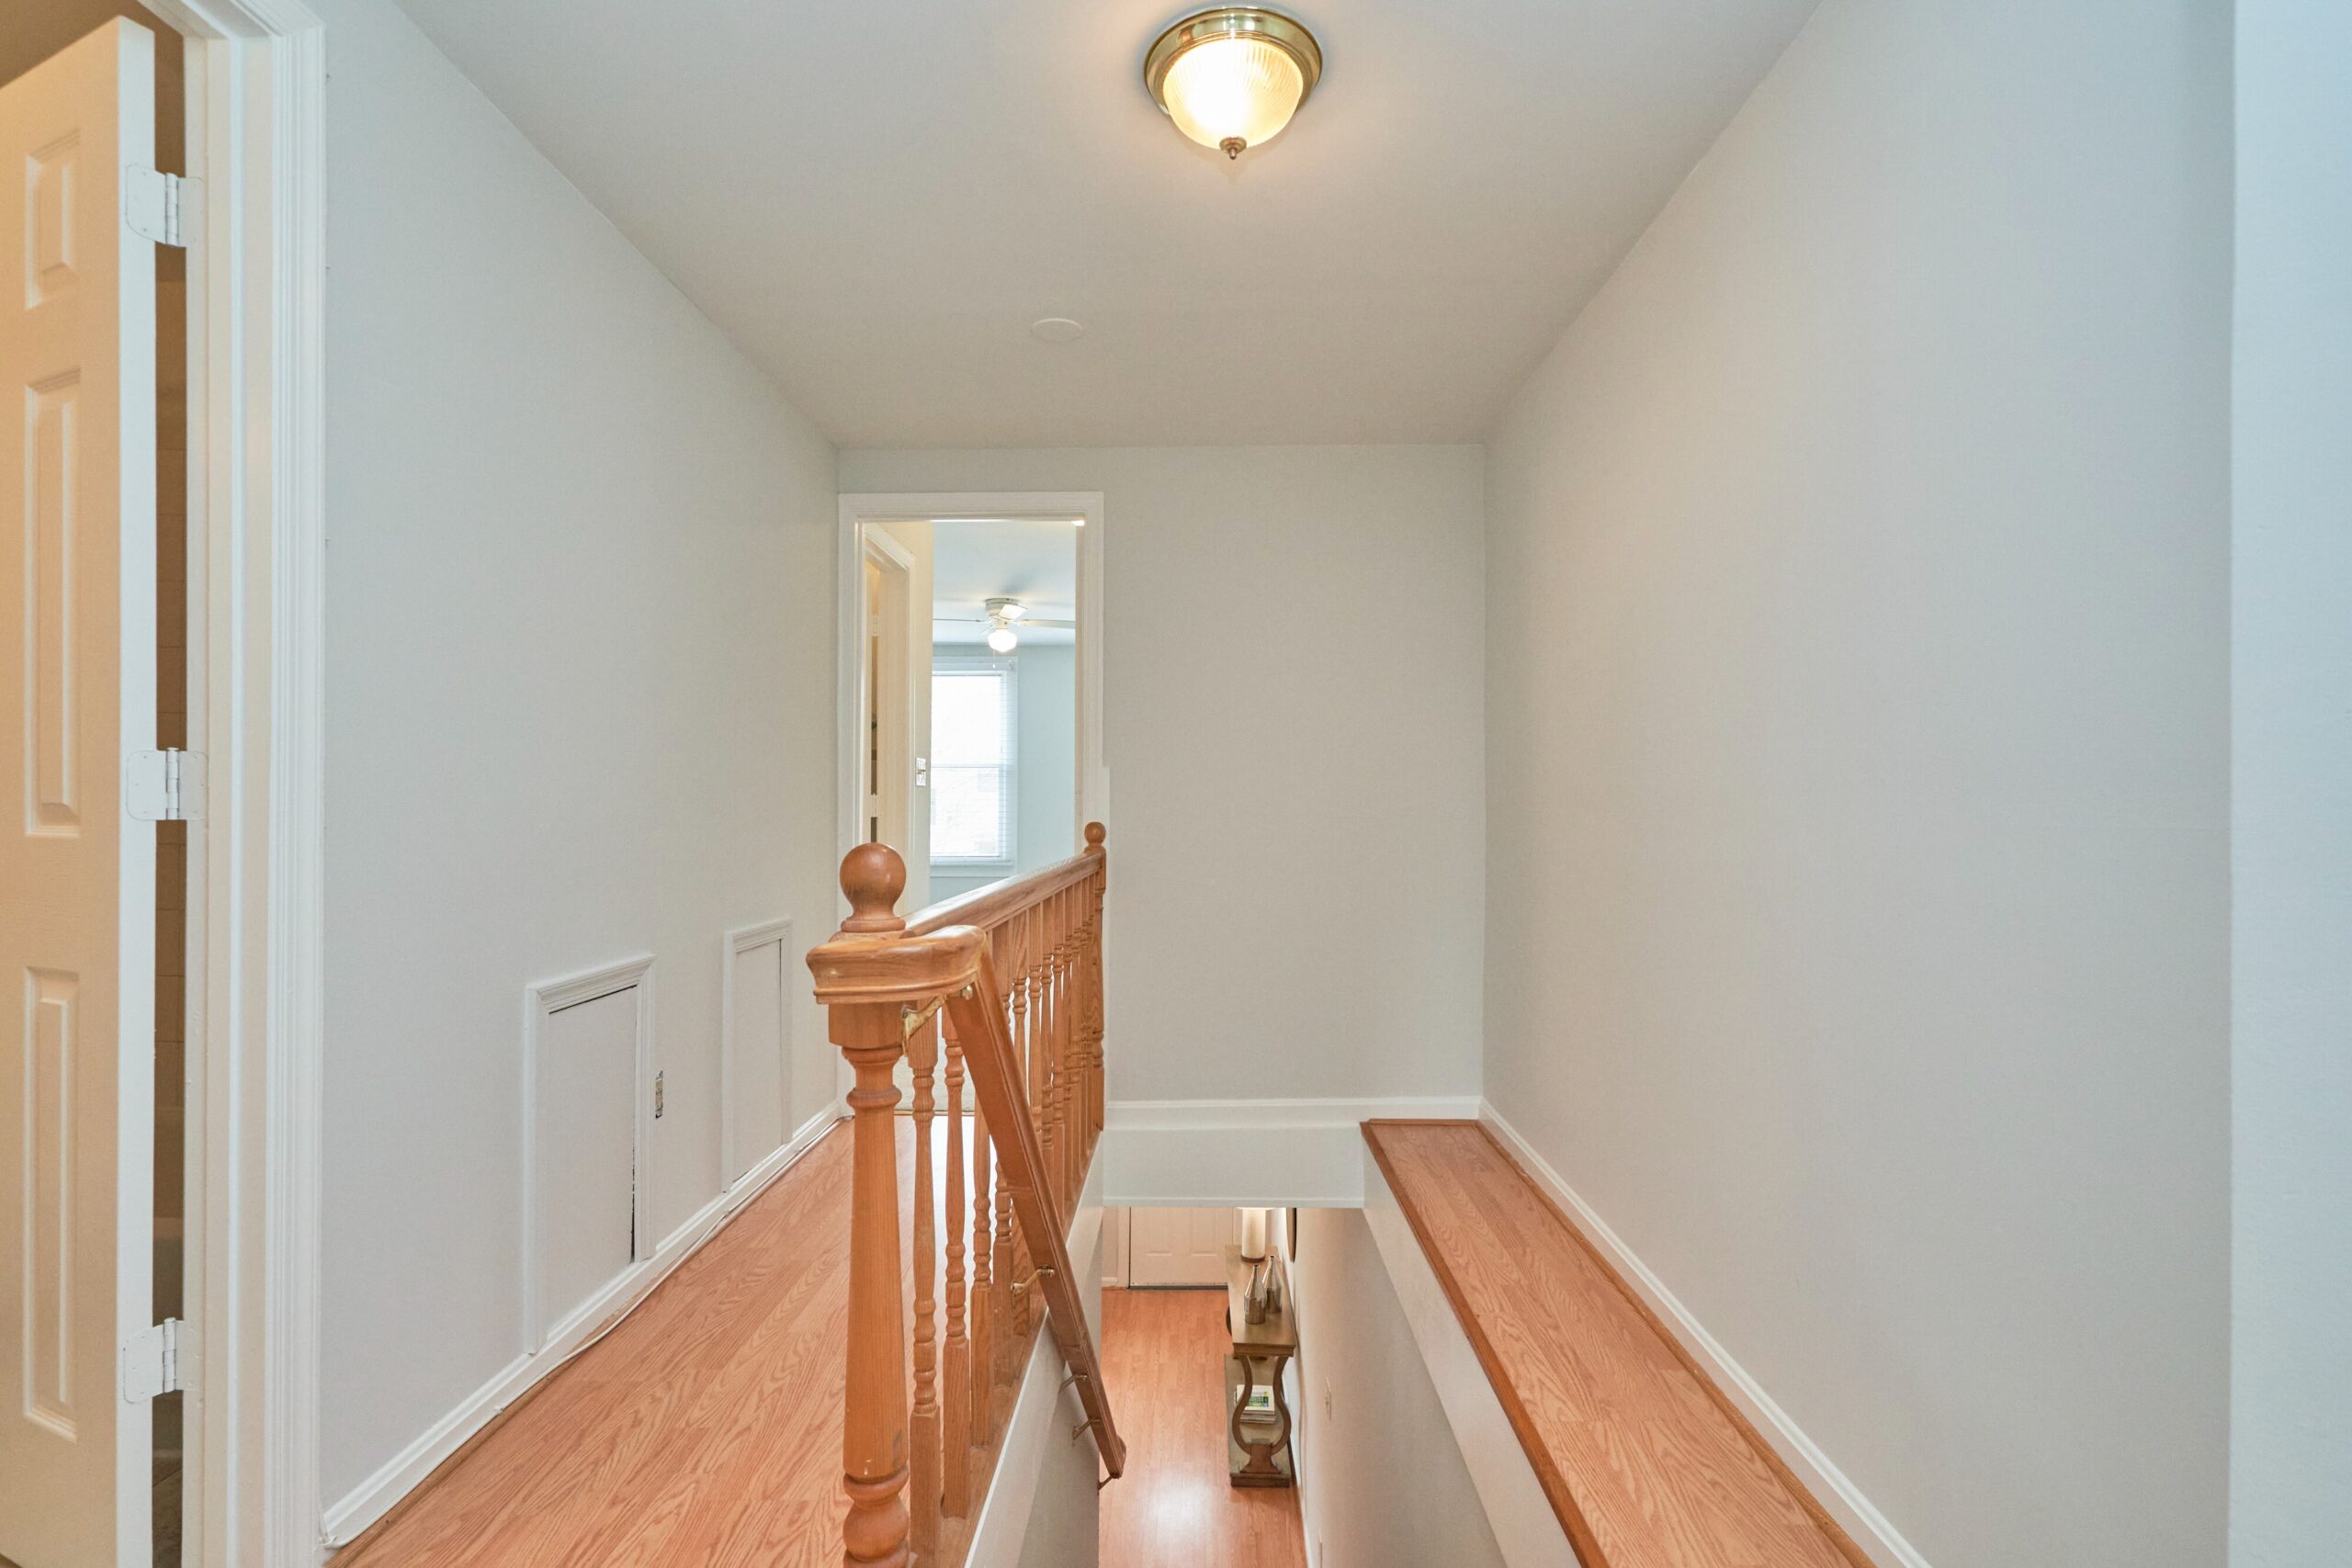 Professional interior photo of 1313 K Street SE, Washington, DC - showing the top of the stairs looking down to the main floor as well as down the narrow hallway to the bedroom